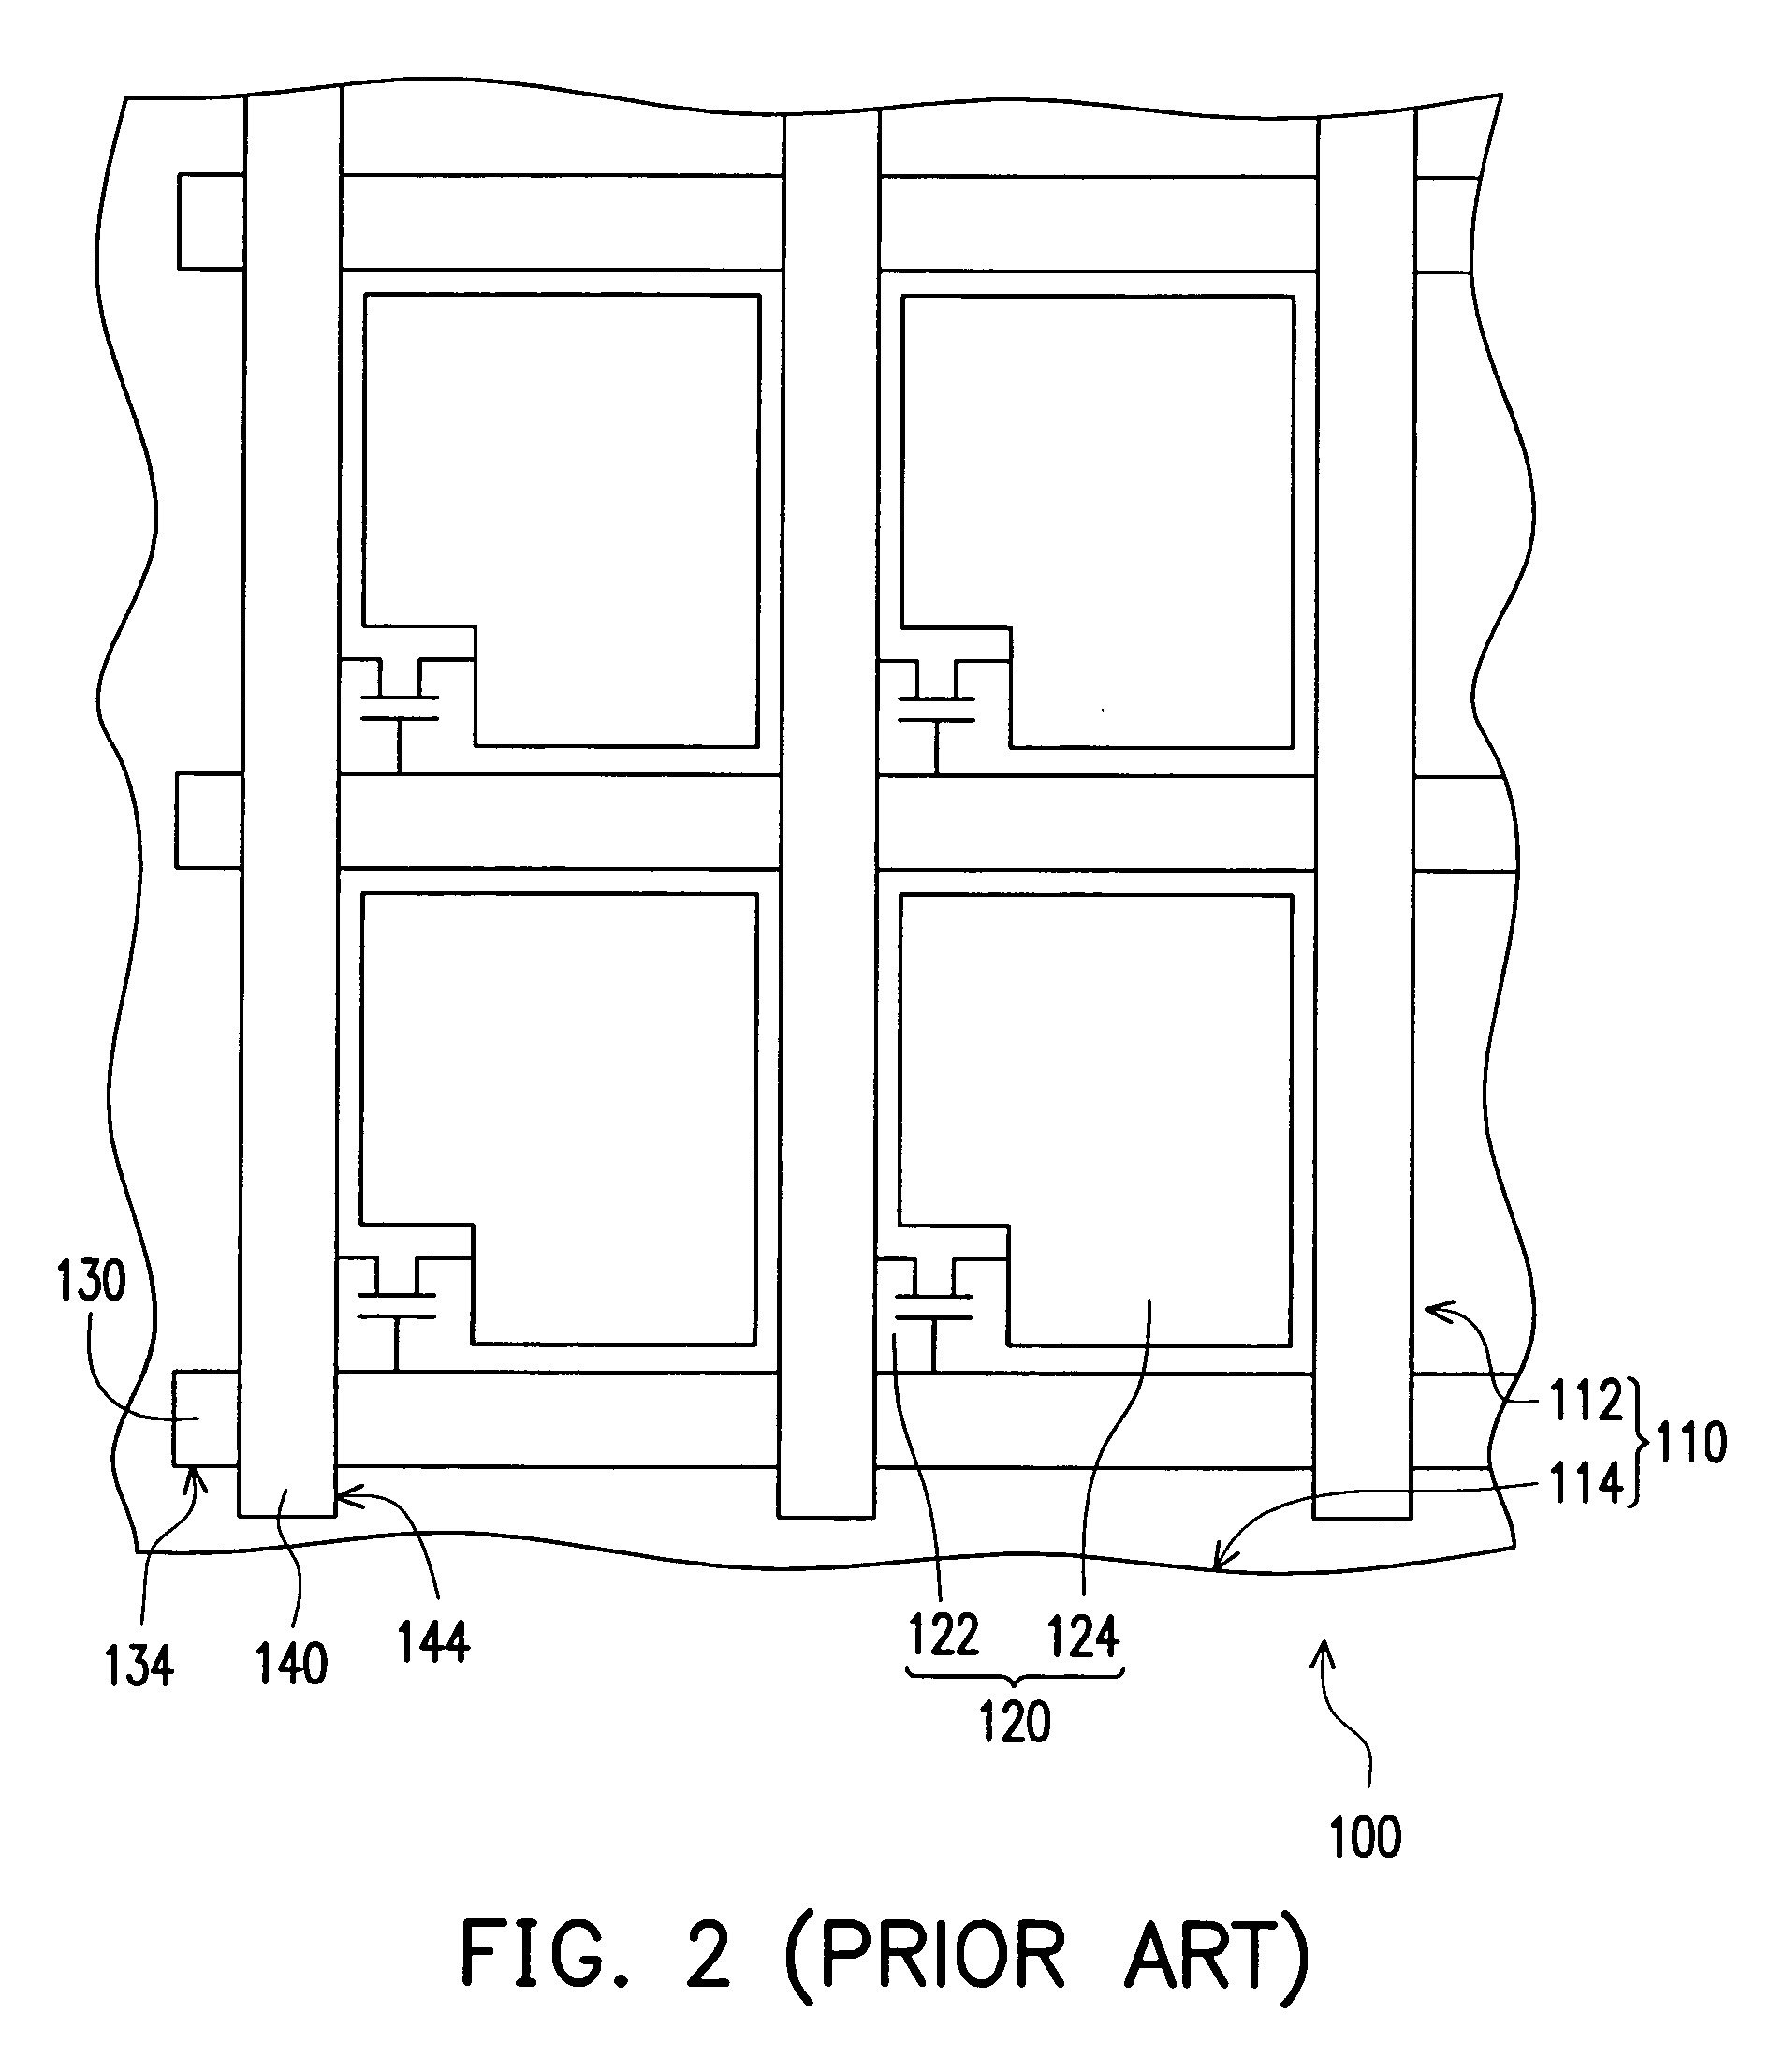 Thin film transistor array substrate having scan or data lines extending to peripheral area without exceeding respectively outmost data and scan lines for reducing electrostatic discharge damage